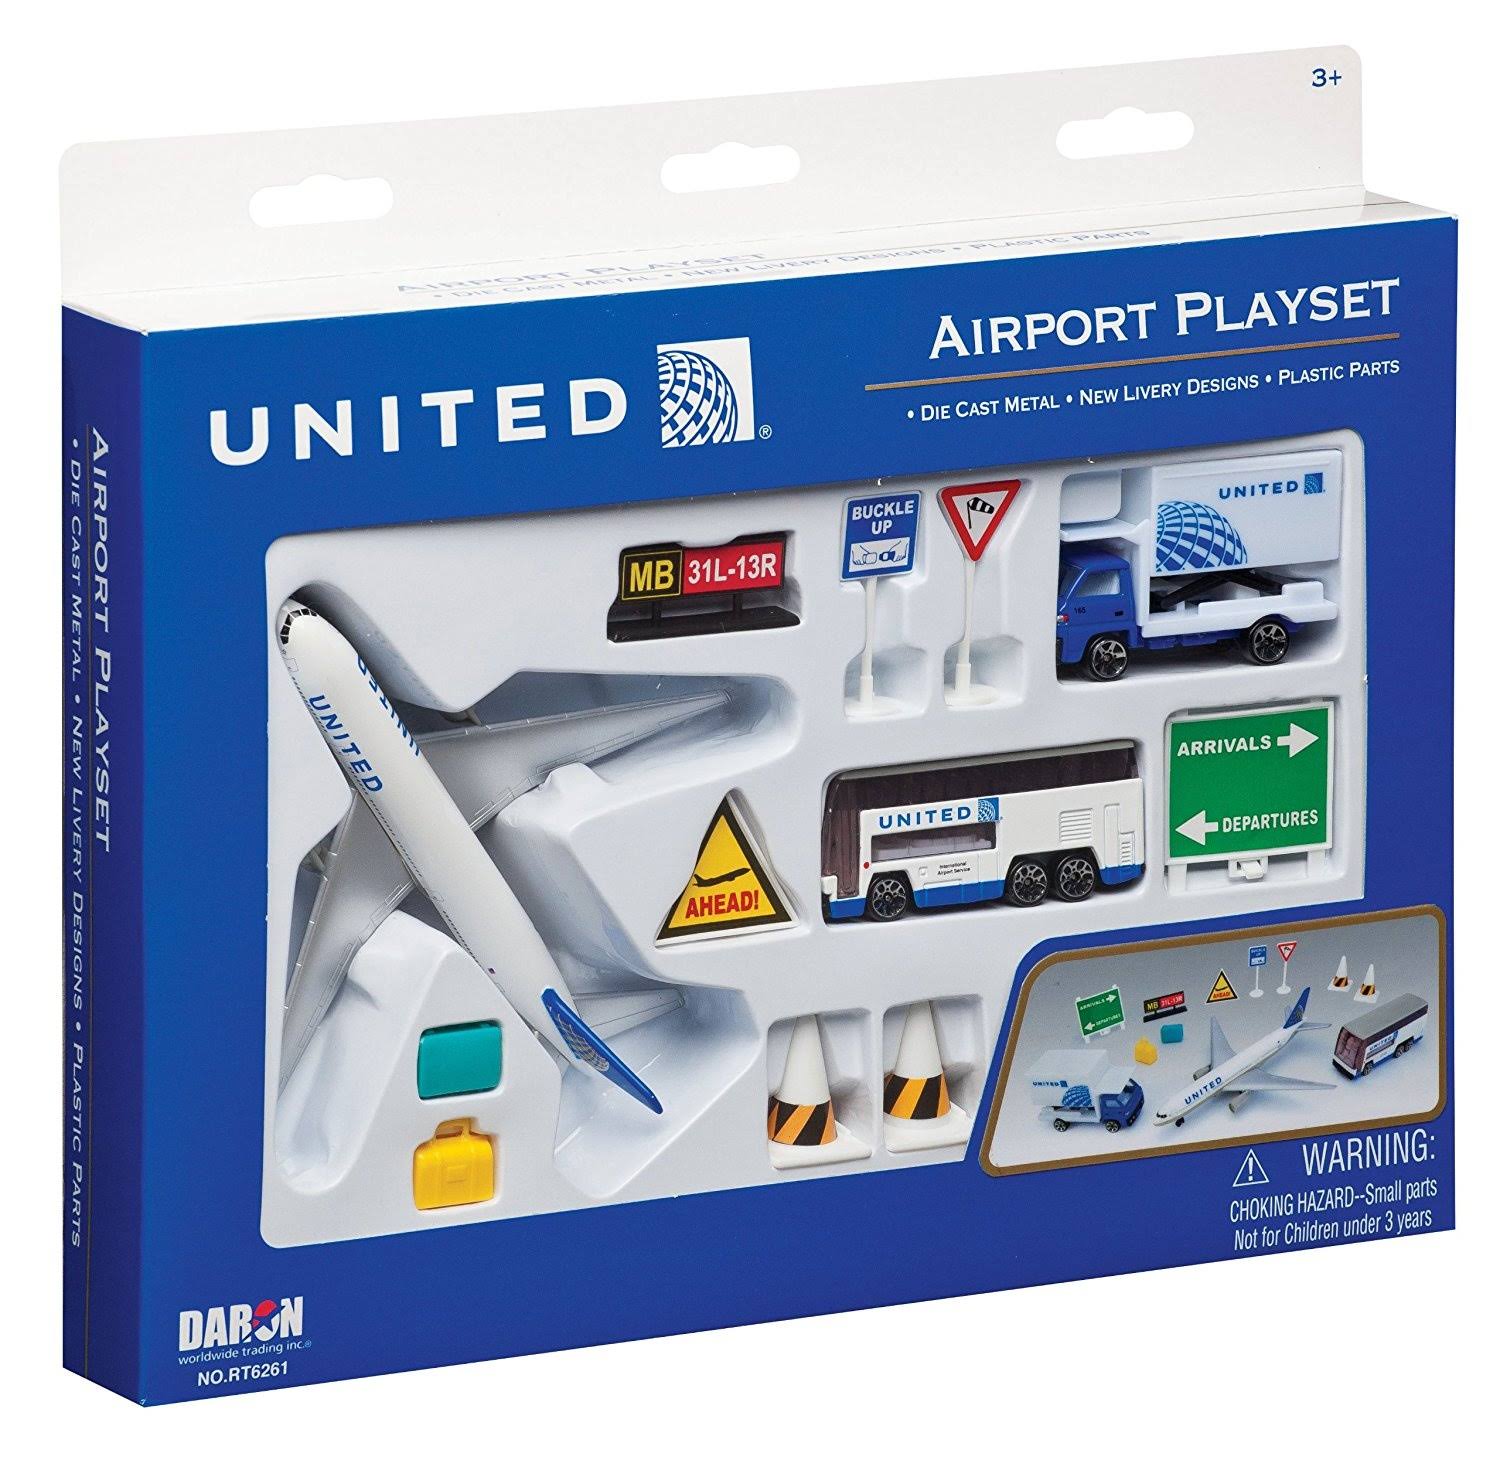 Daron United Airlines Airport Play Set